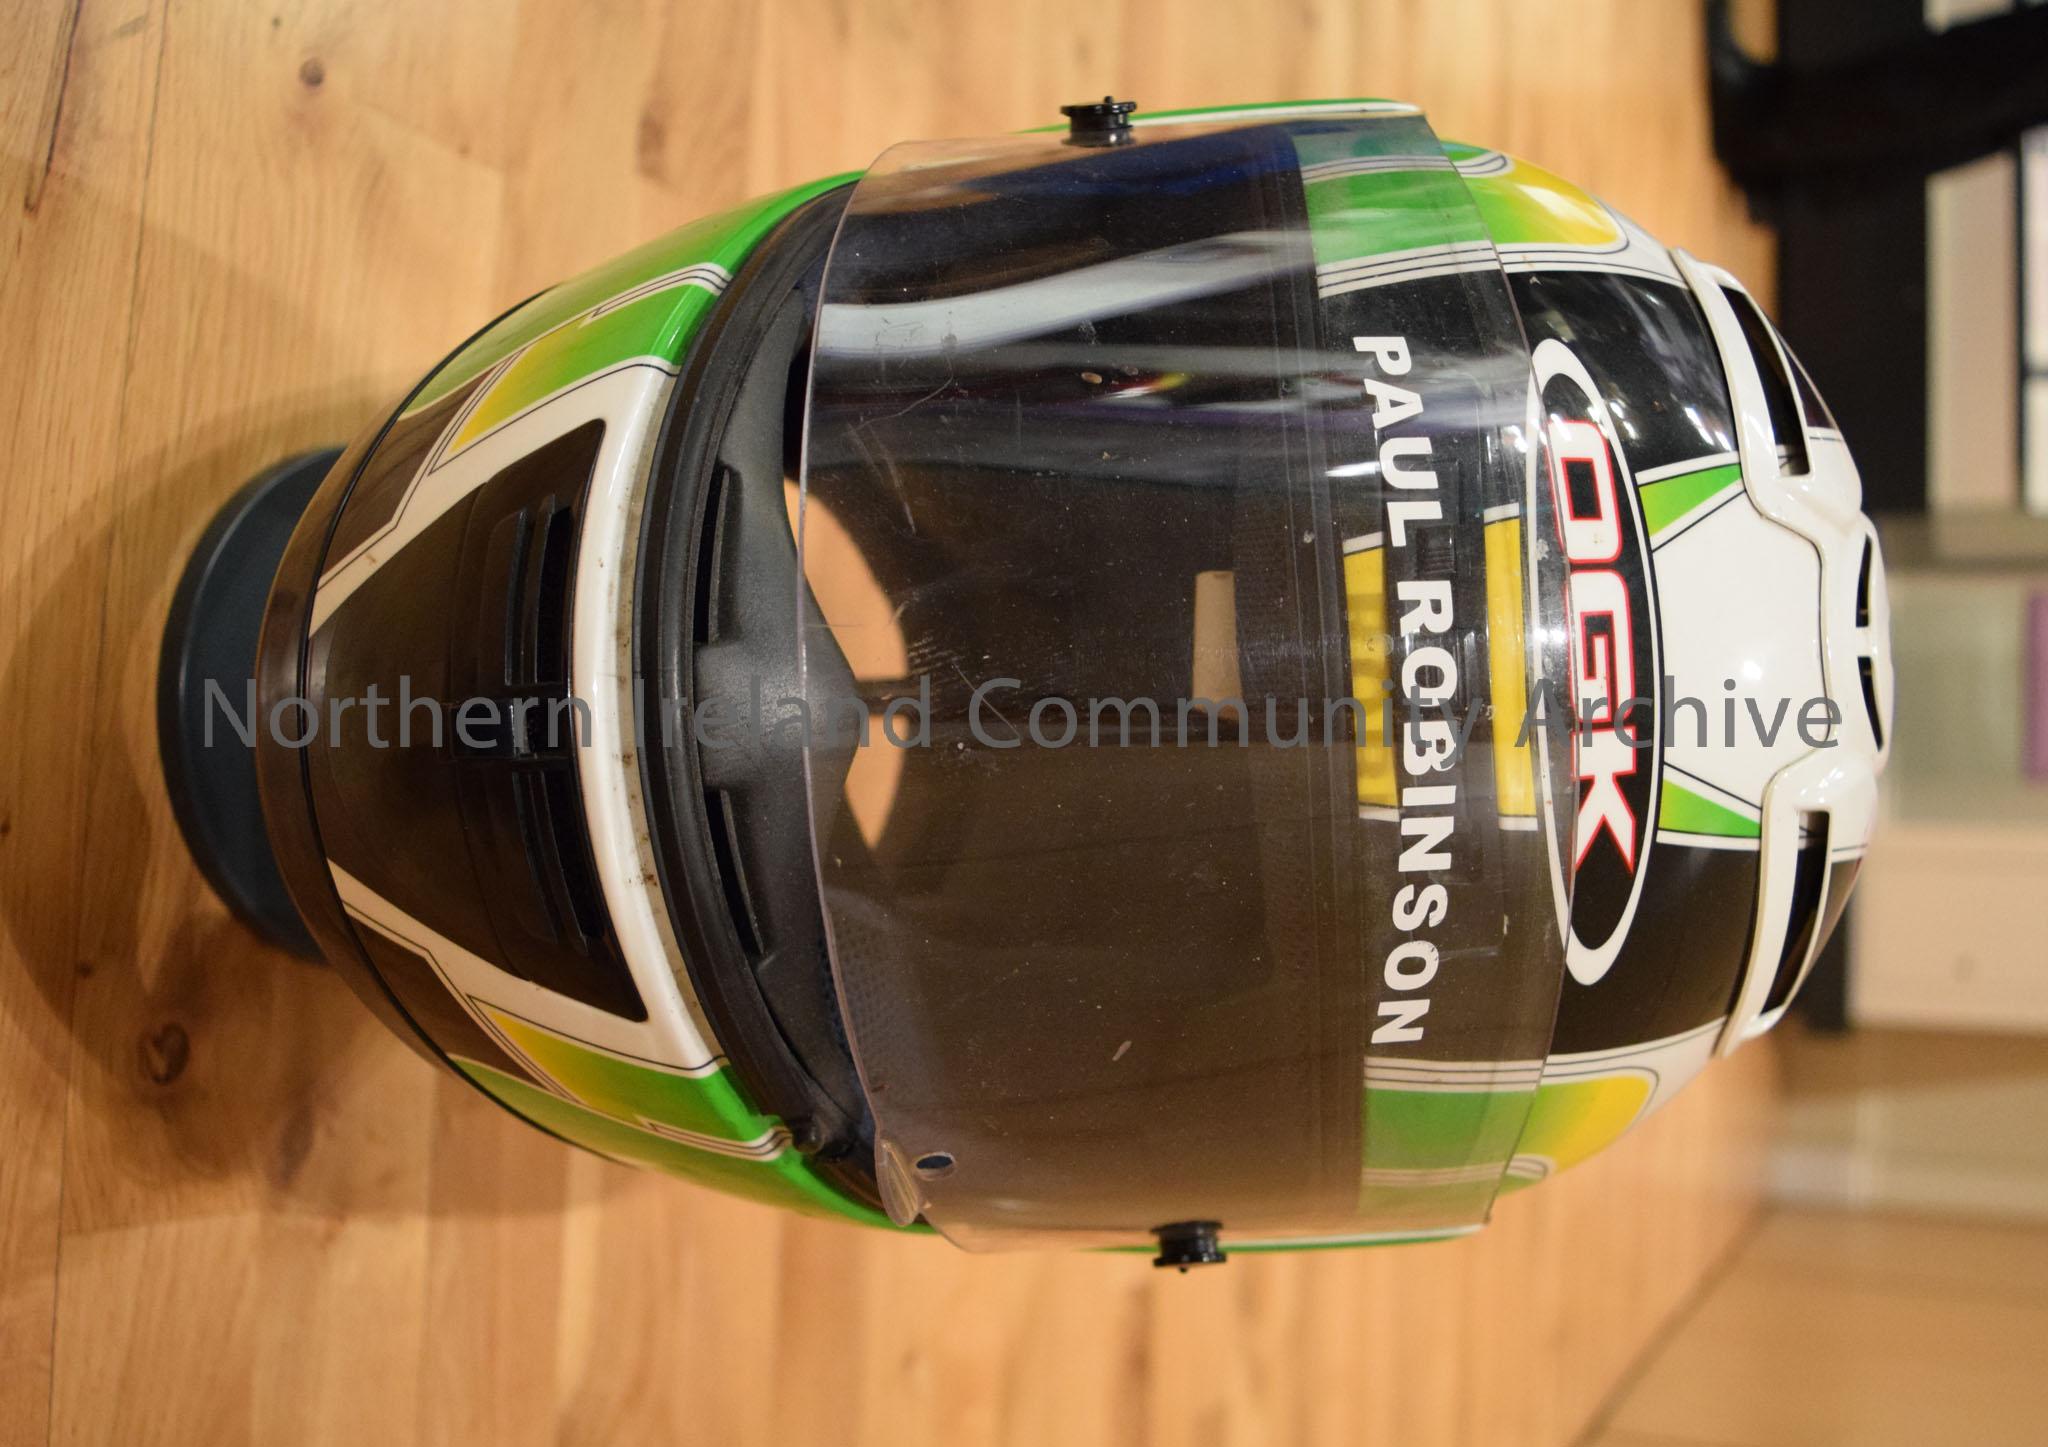 OGK motorcycle helmet belonging to Paul Robinson. White helmet with two “z” shaped black stripes and green and yellow sides. – 2016.116 (2)